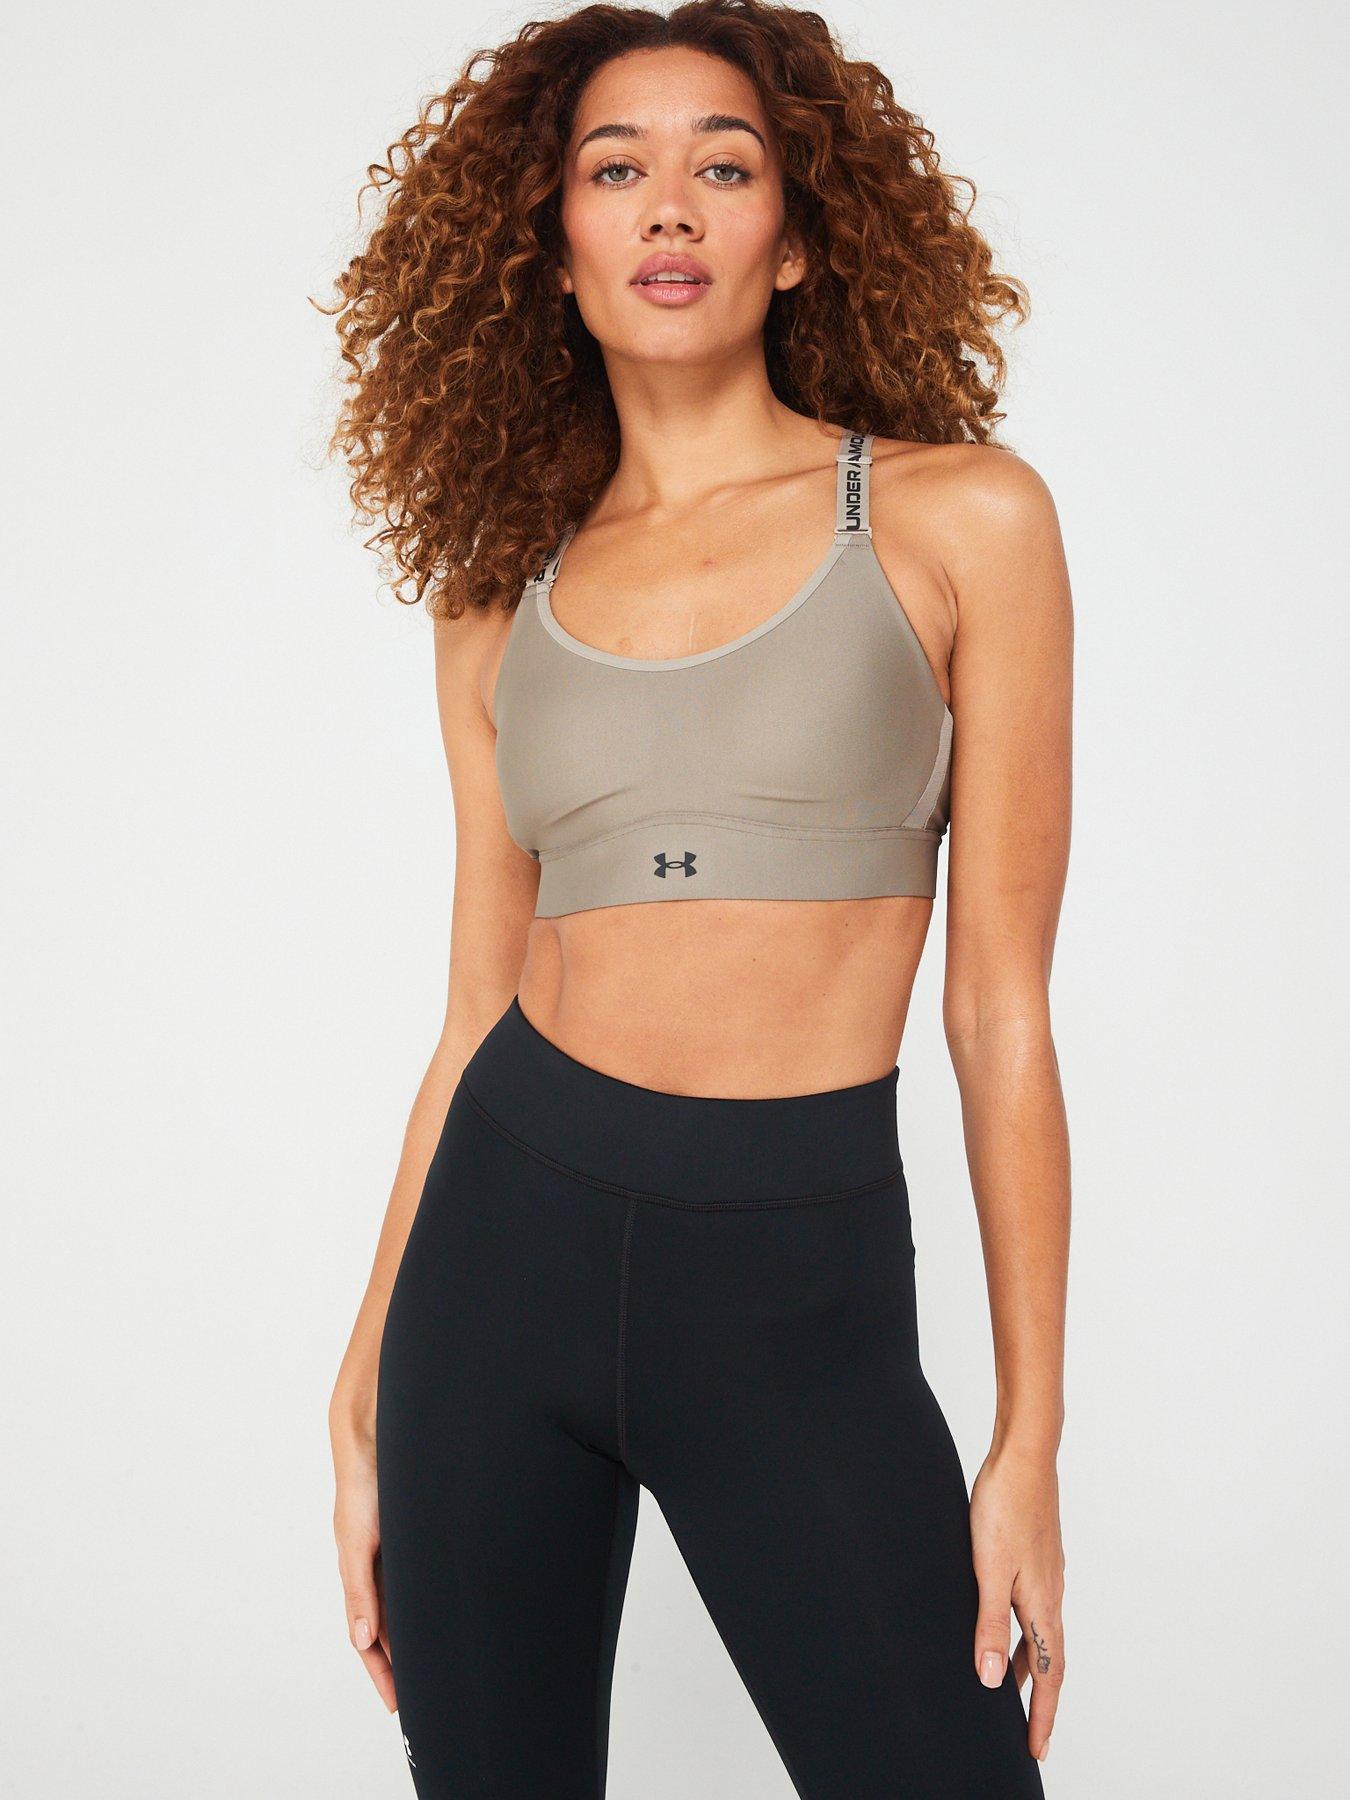 Under armour, Sports bras, Womens sports clothing